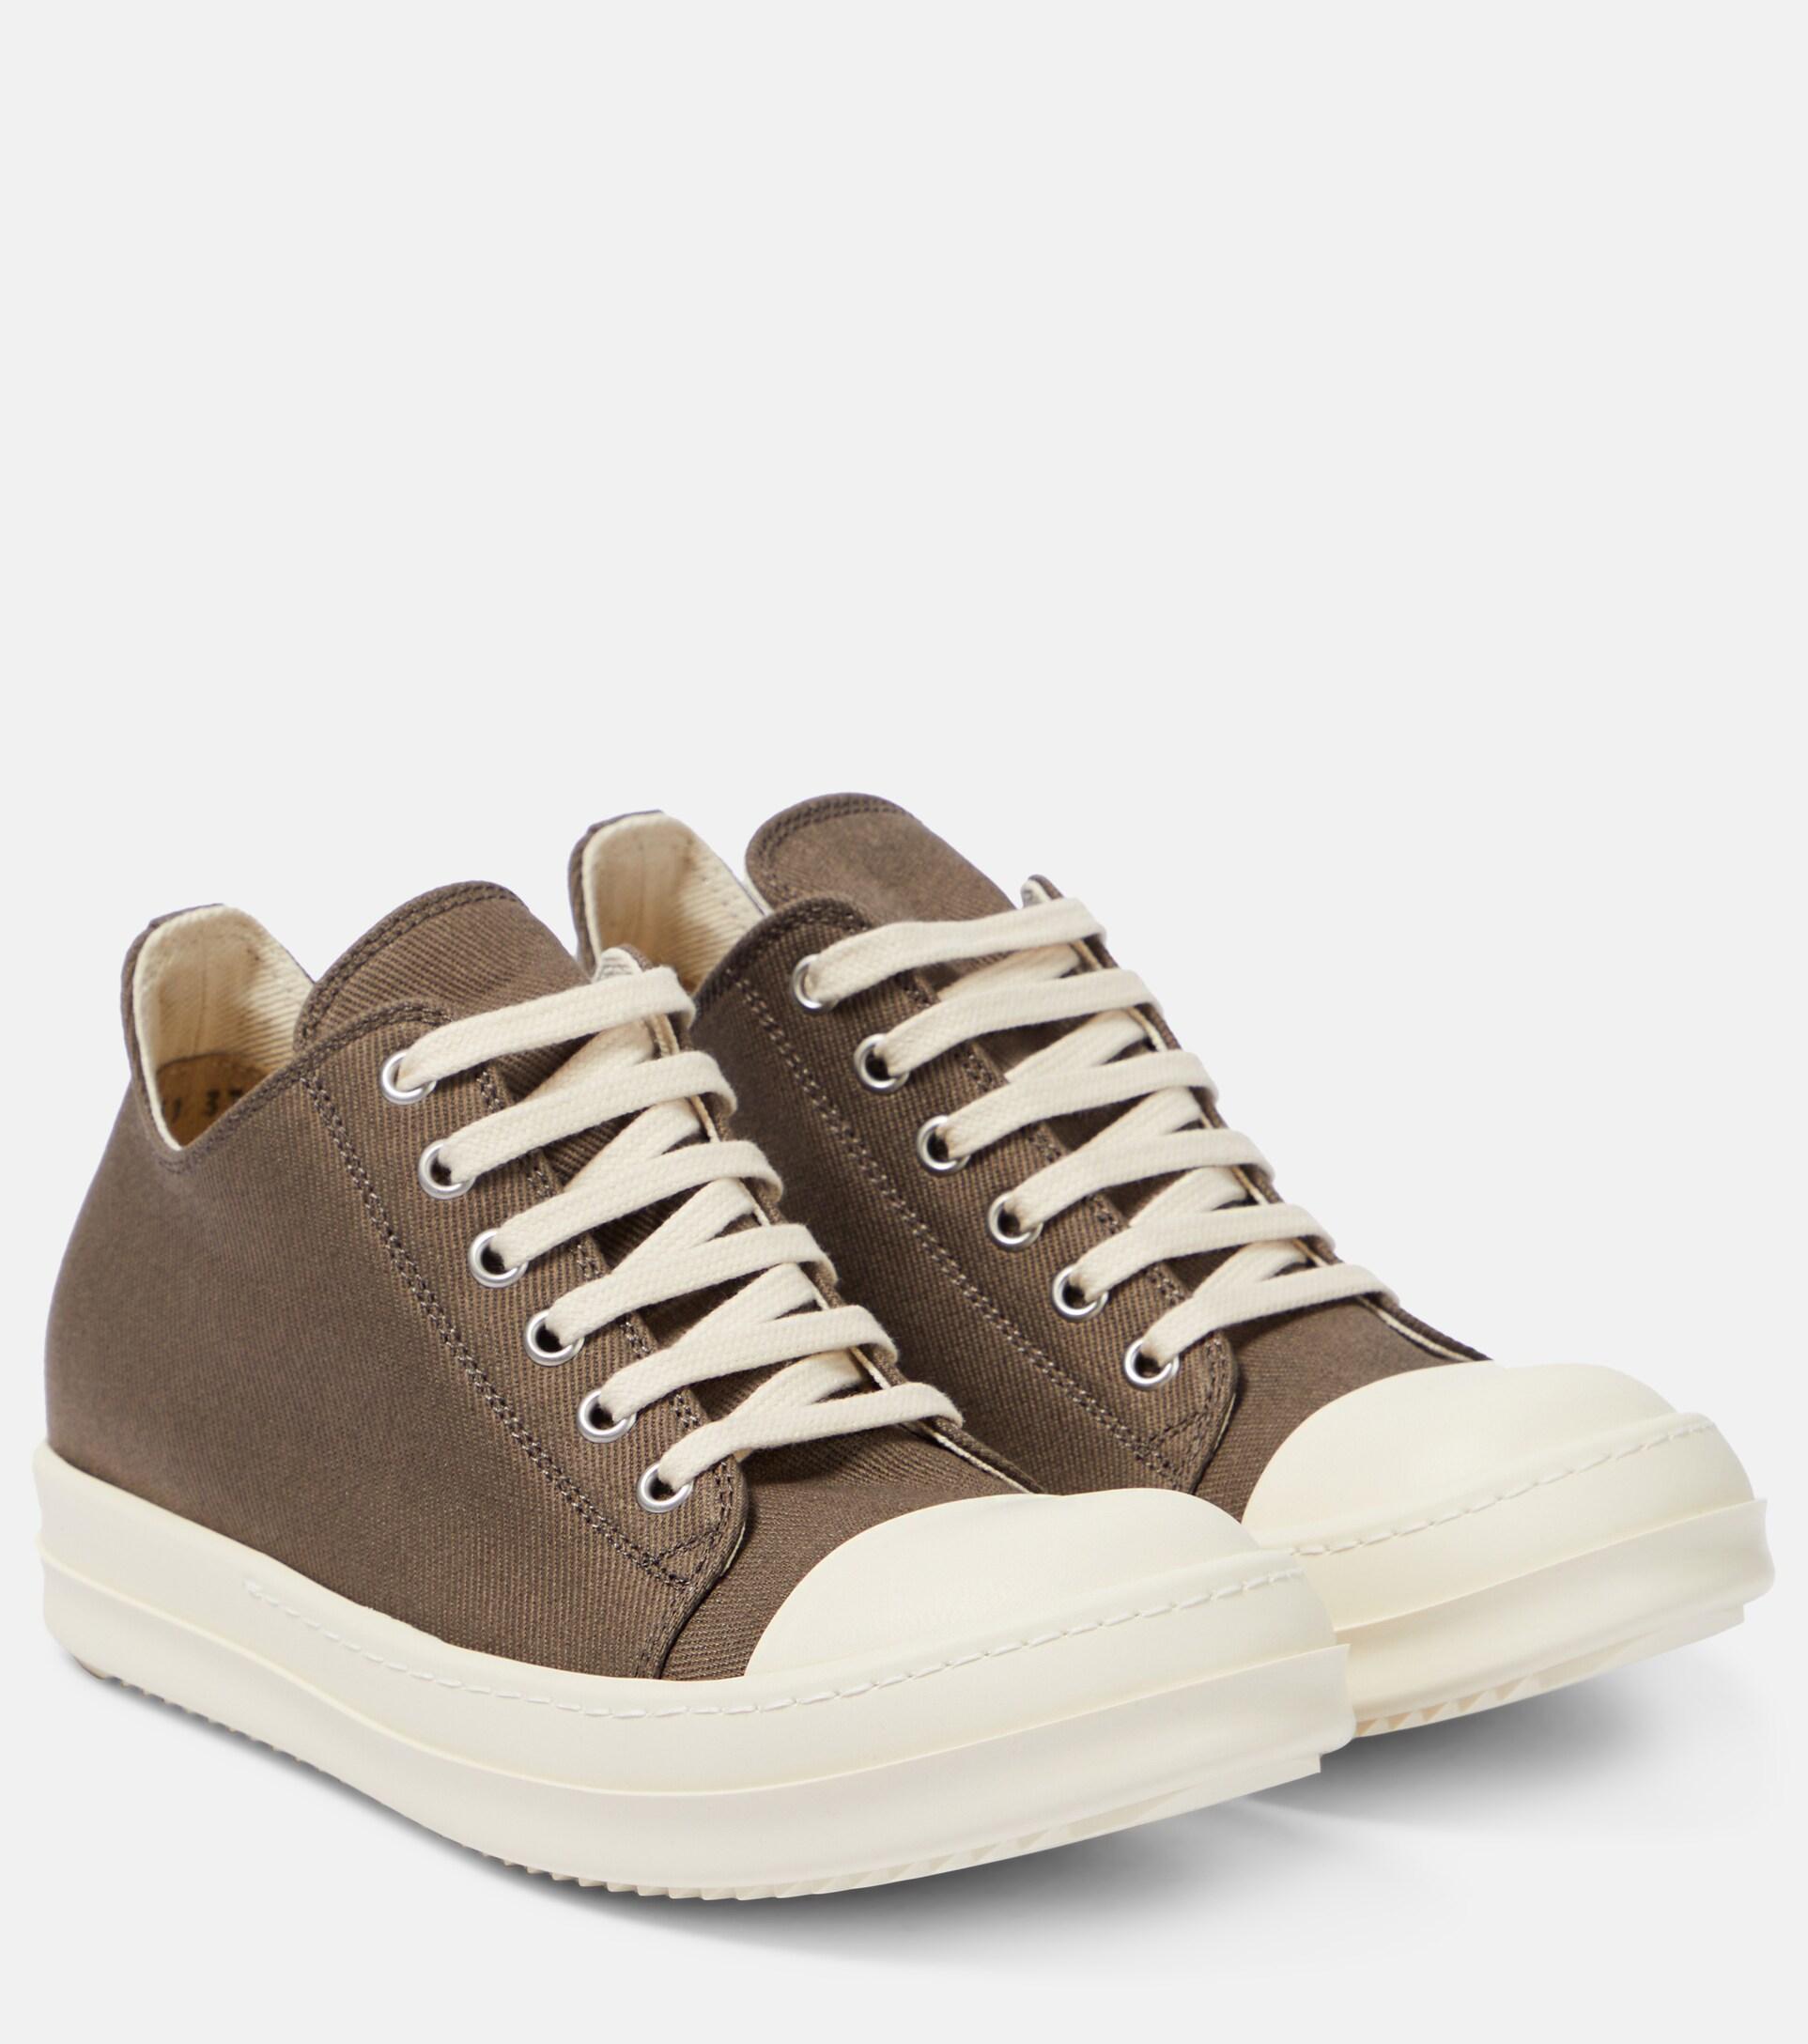 Rick Owens Luxor Canvas Sneakers in Natural | Lyst